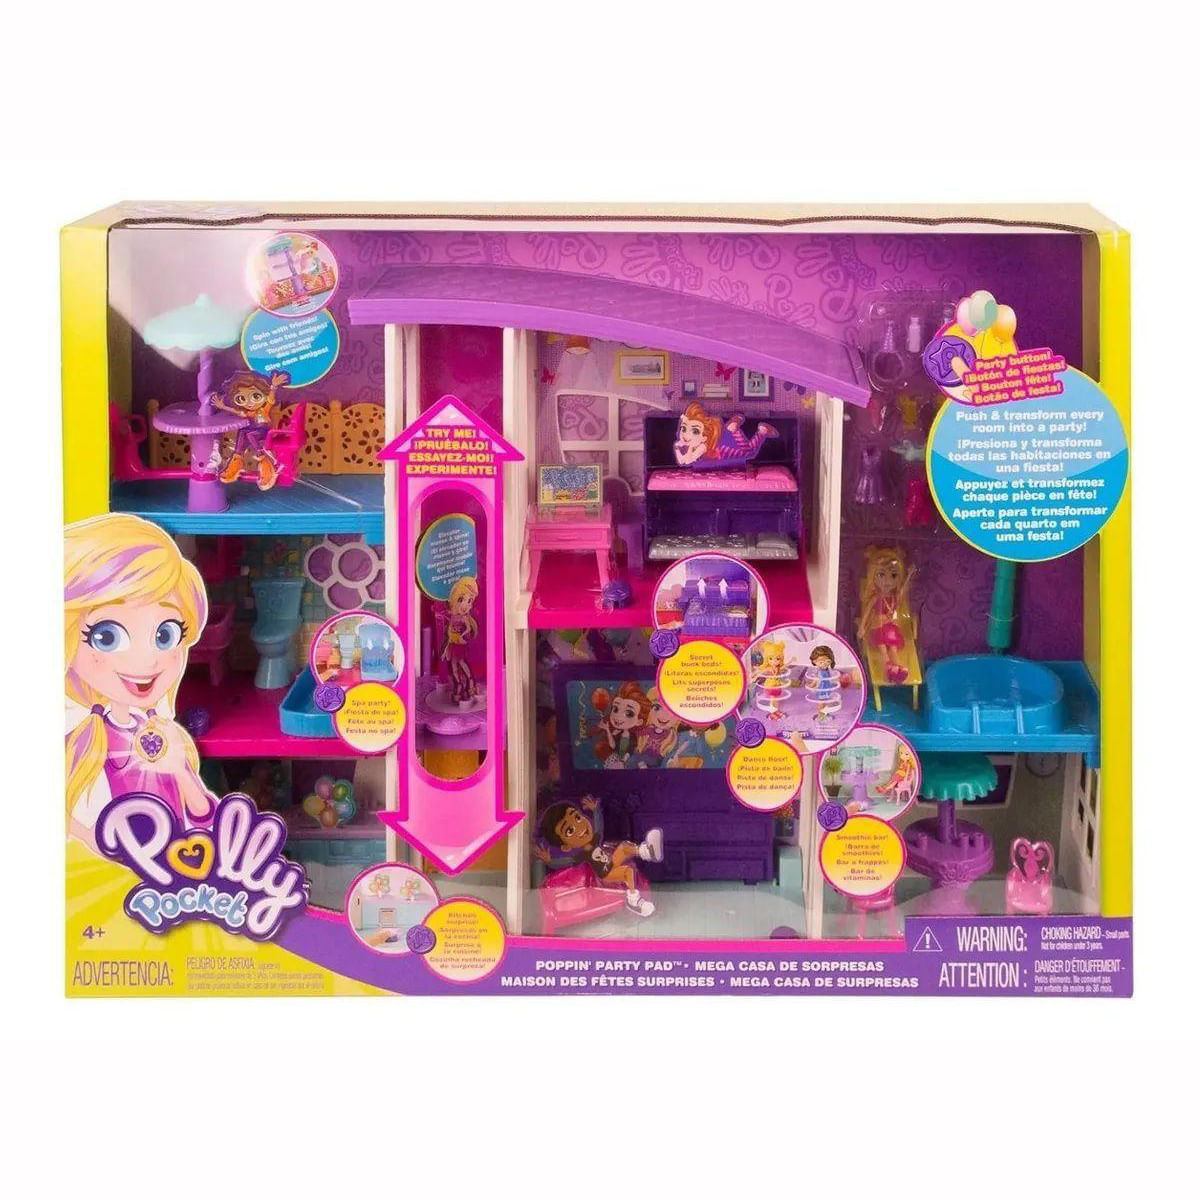 Polly Pocket Playset, Travel Toy with 2 Micro Dolls & Surprise Accessories,  Pocket World Donut Pajama Party Compact, Food Toy